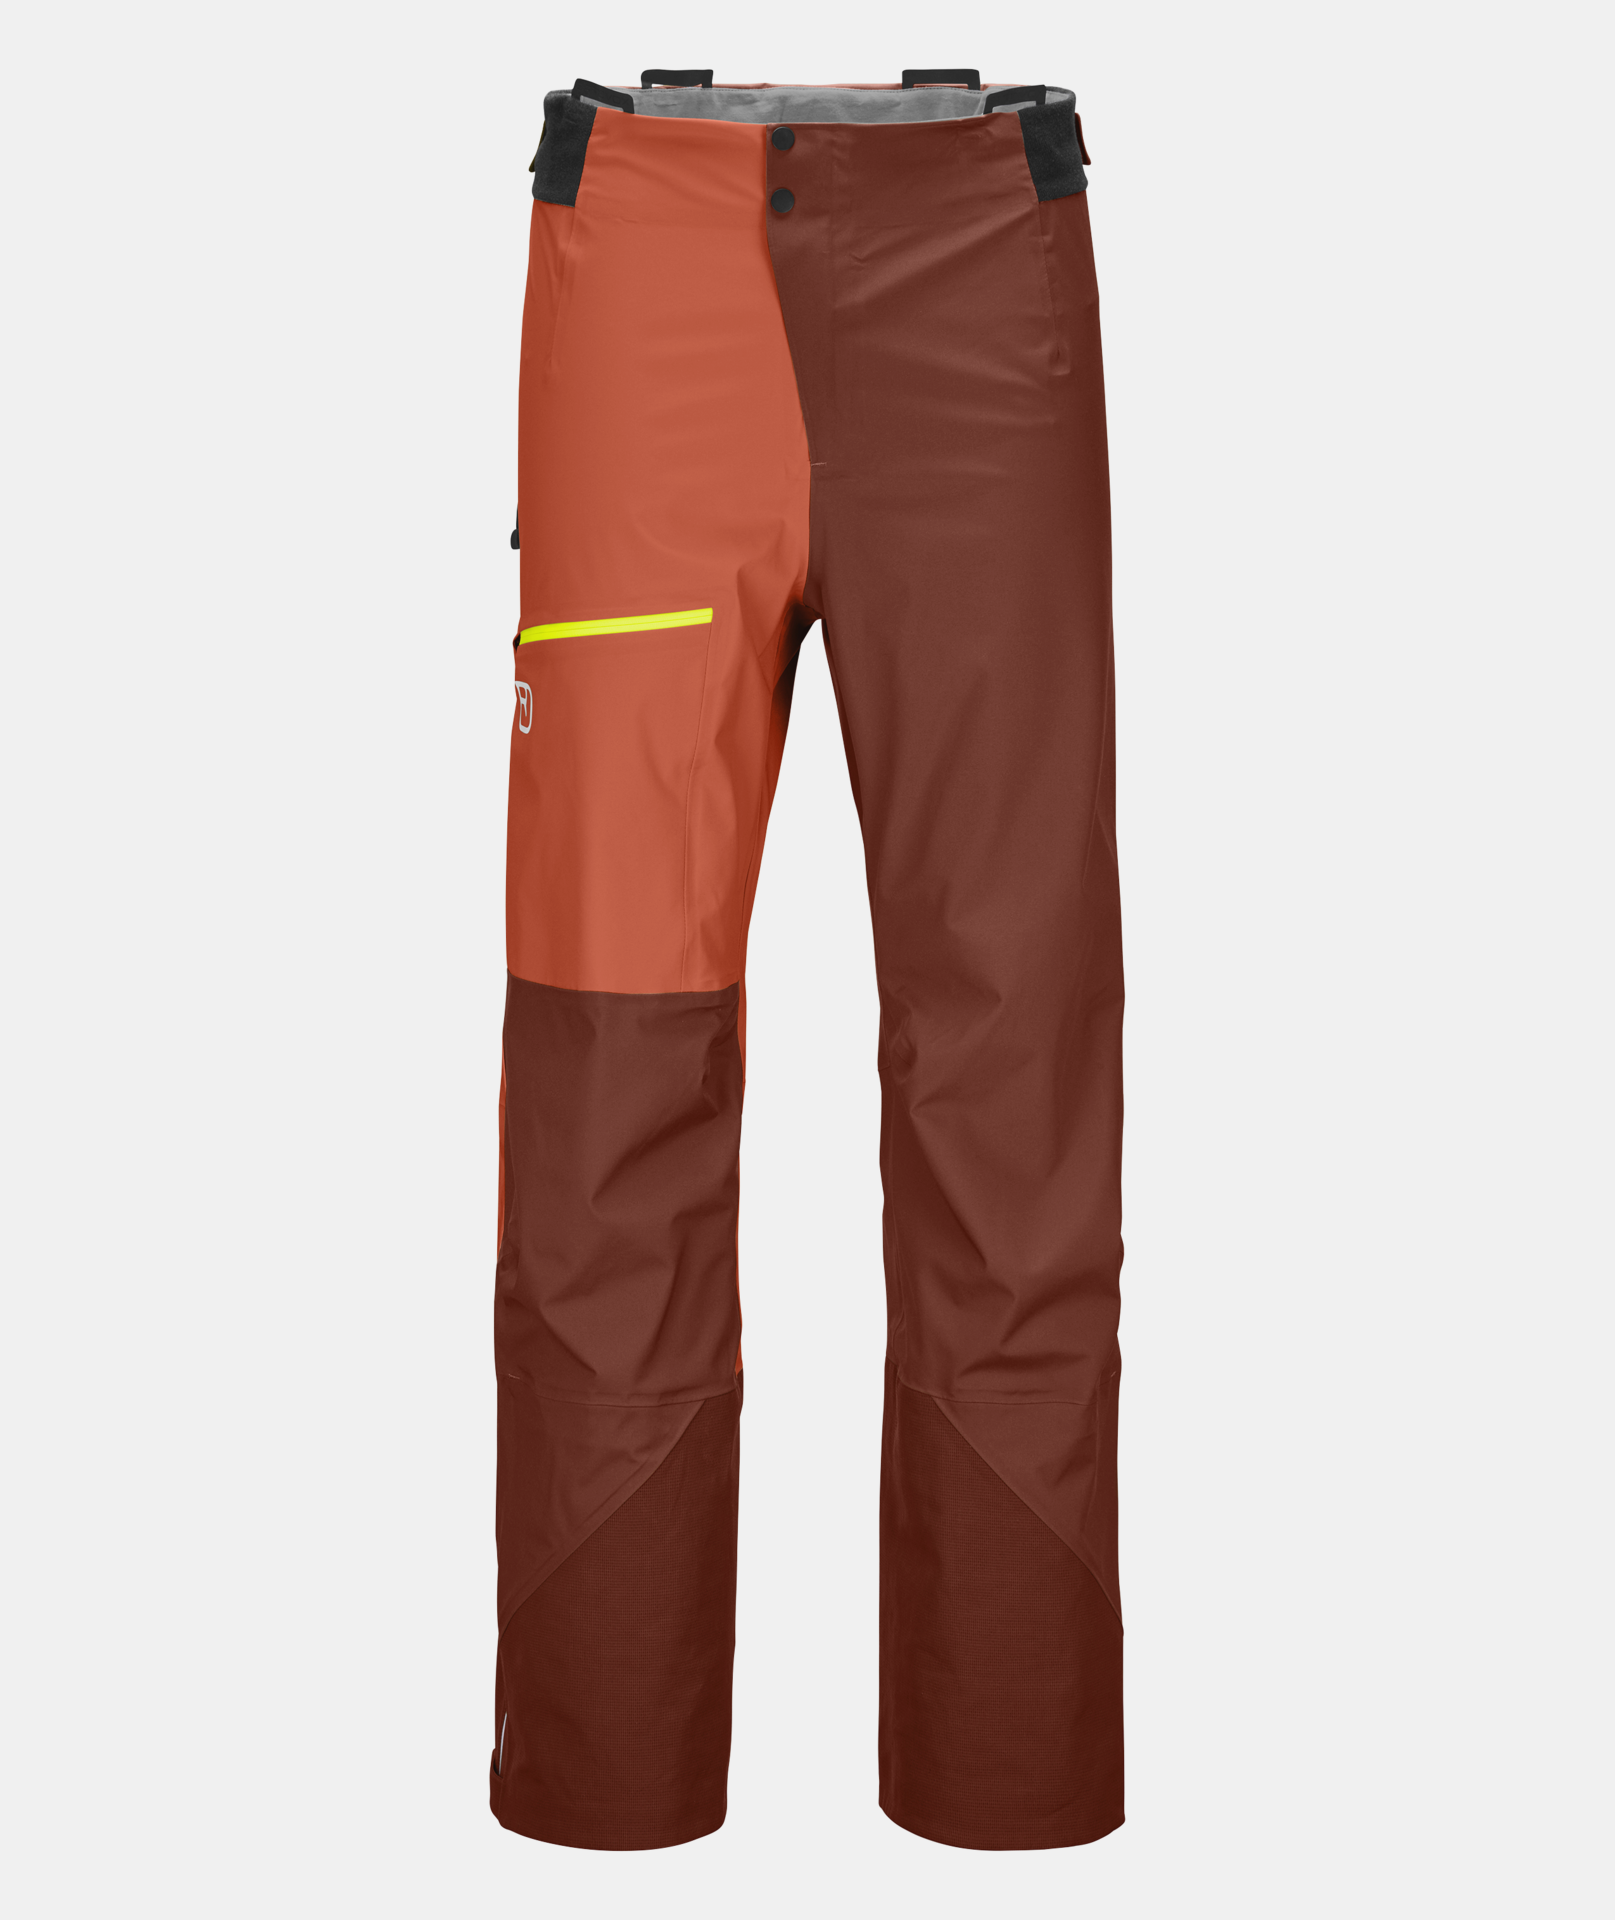 Outdoor trousers and functional trousers from Bergans of Norway, Picture  Organic and Warmpeace | CampingRocks